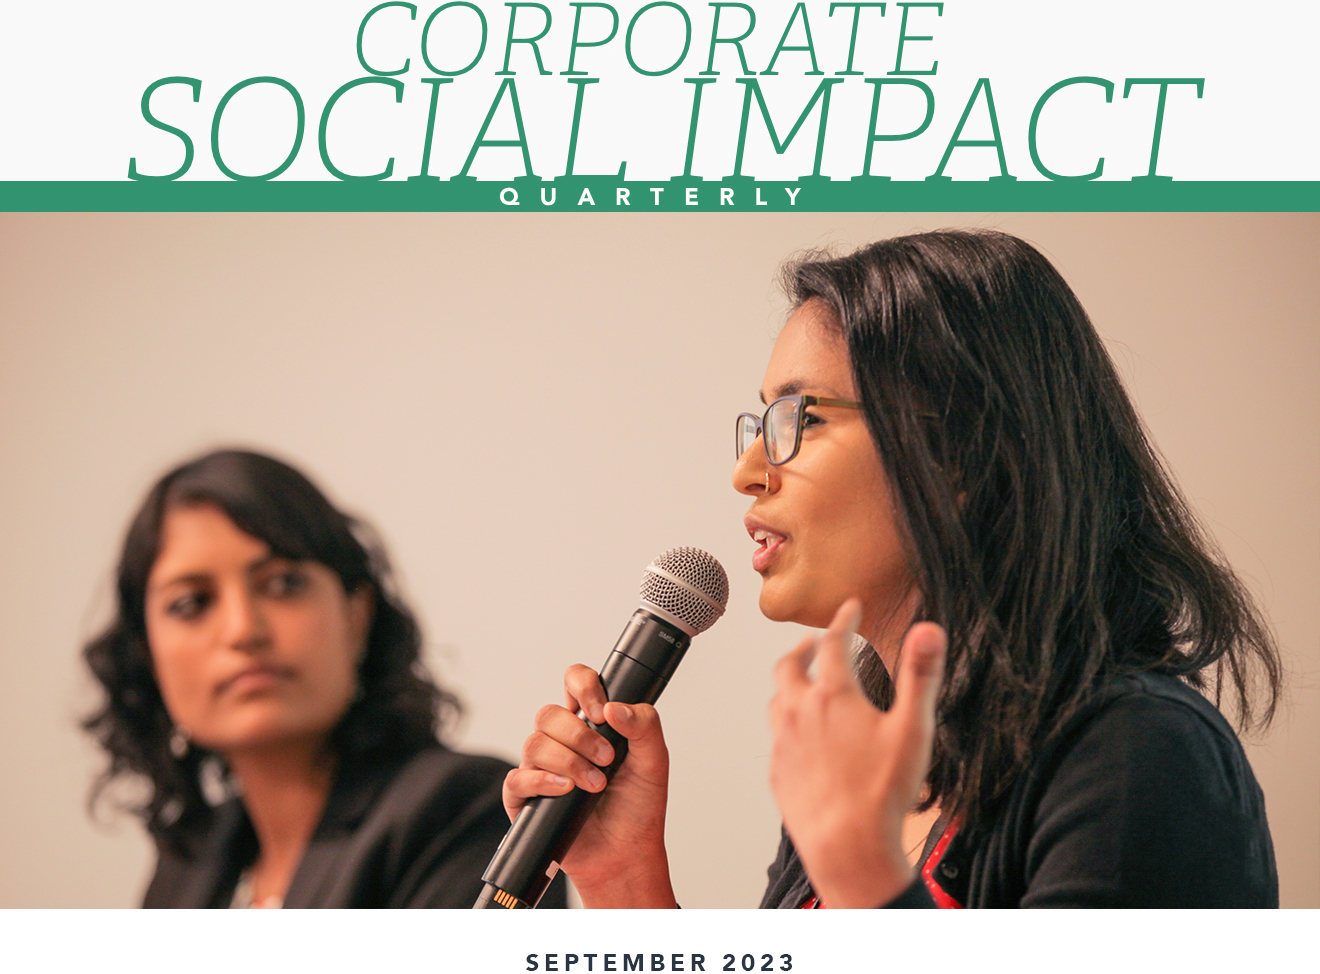 Corporate Social Impact Quarterly / September 2023. A woman with medium-dark skin and black hair speaking into a microphone while a second woman with medium-dark skin and black hair listens to her talk at Google’s Community Space.